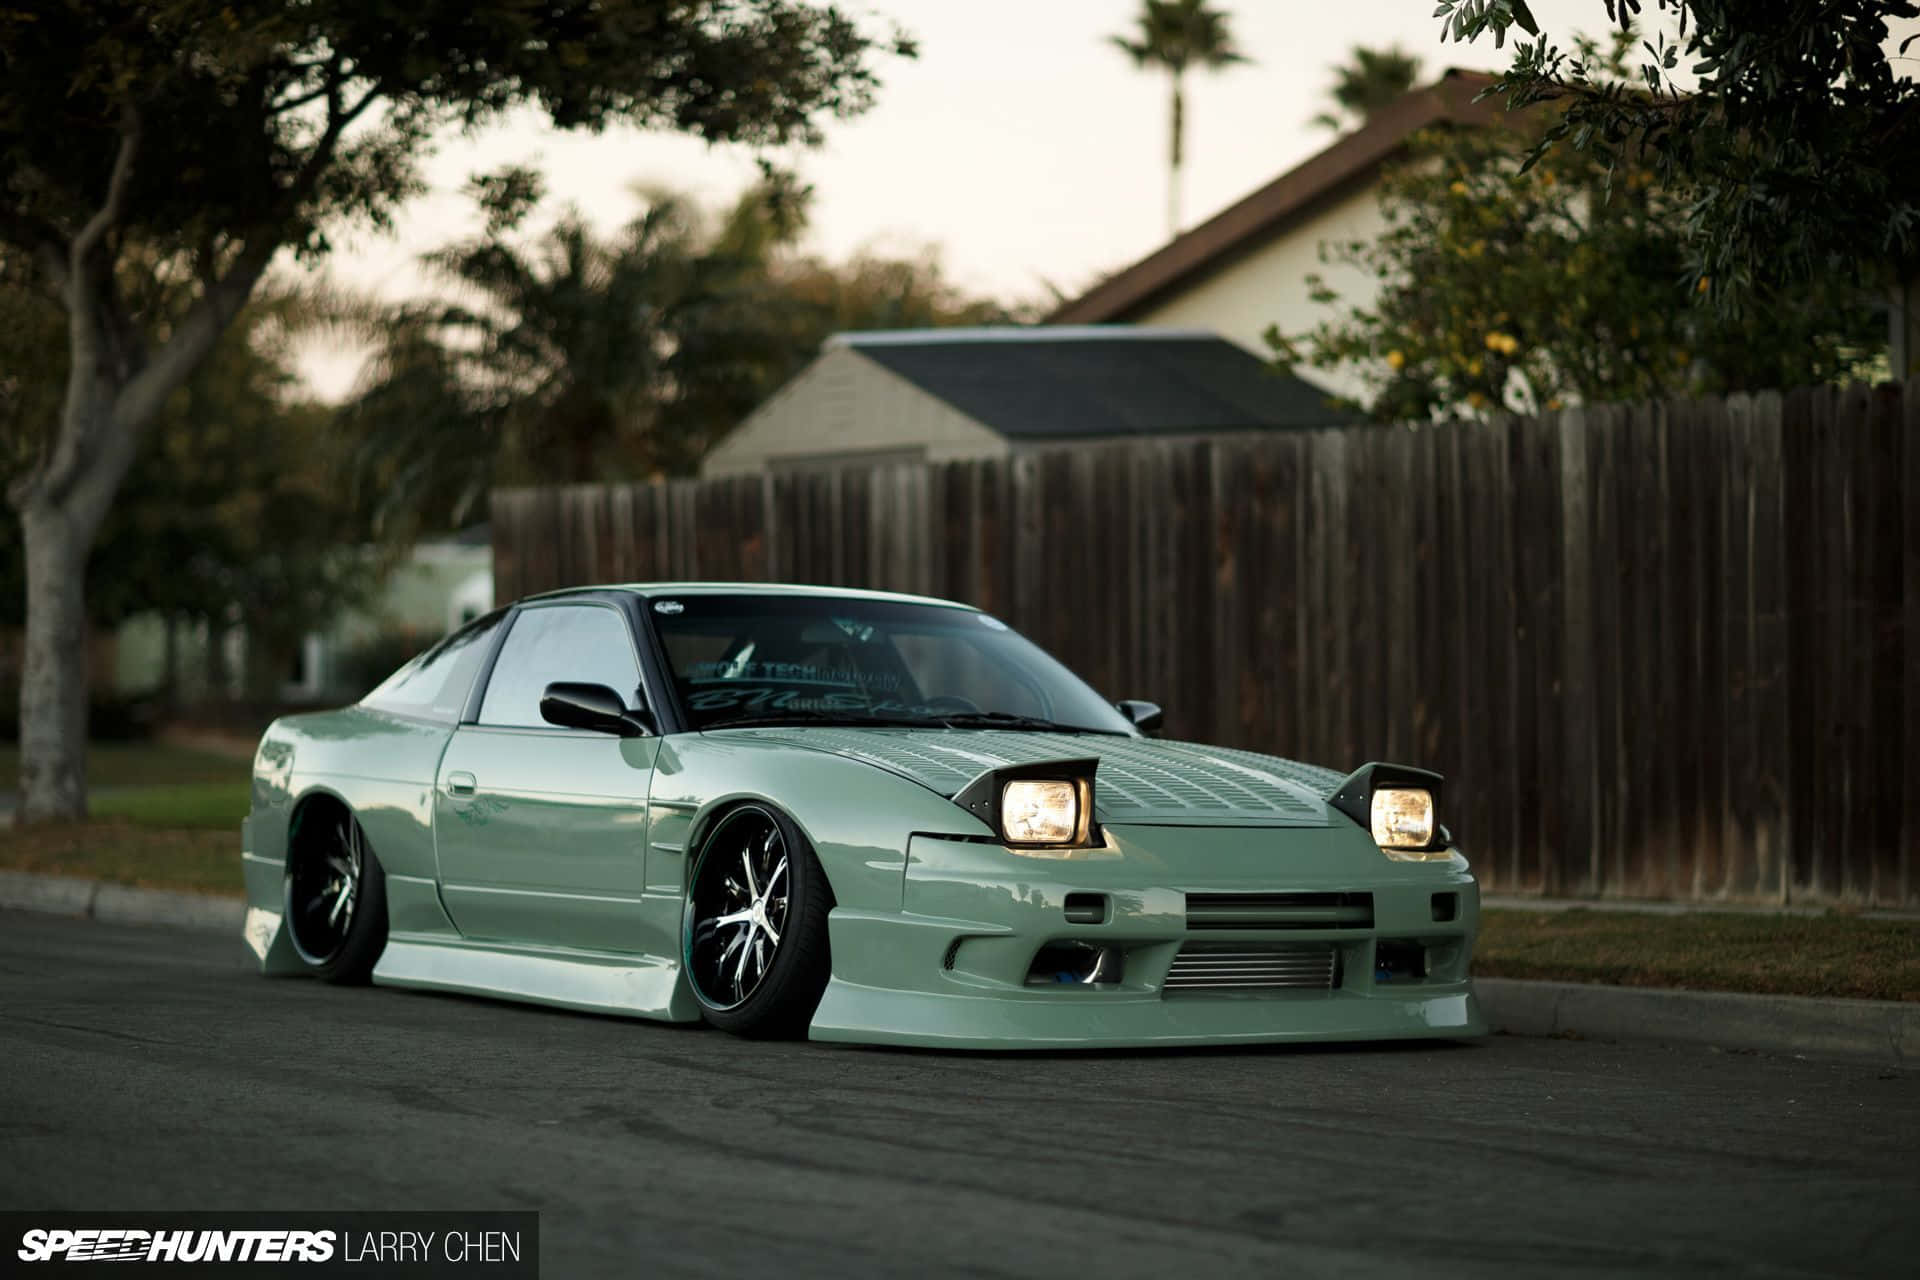 "The Nissan Silvia S13 - A Classic Among Sports Cars" Wallpaper